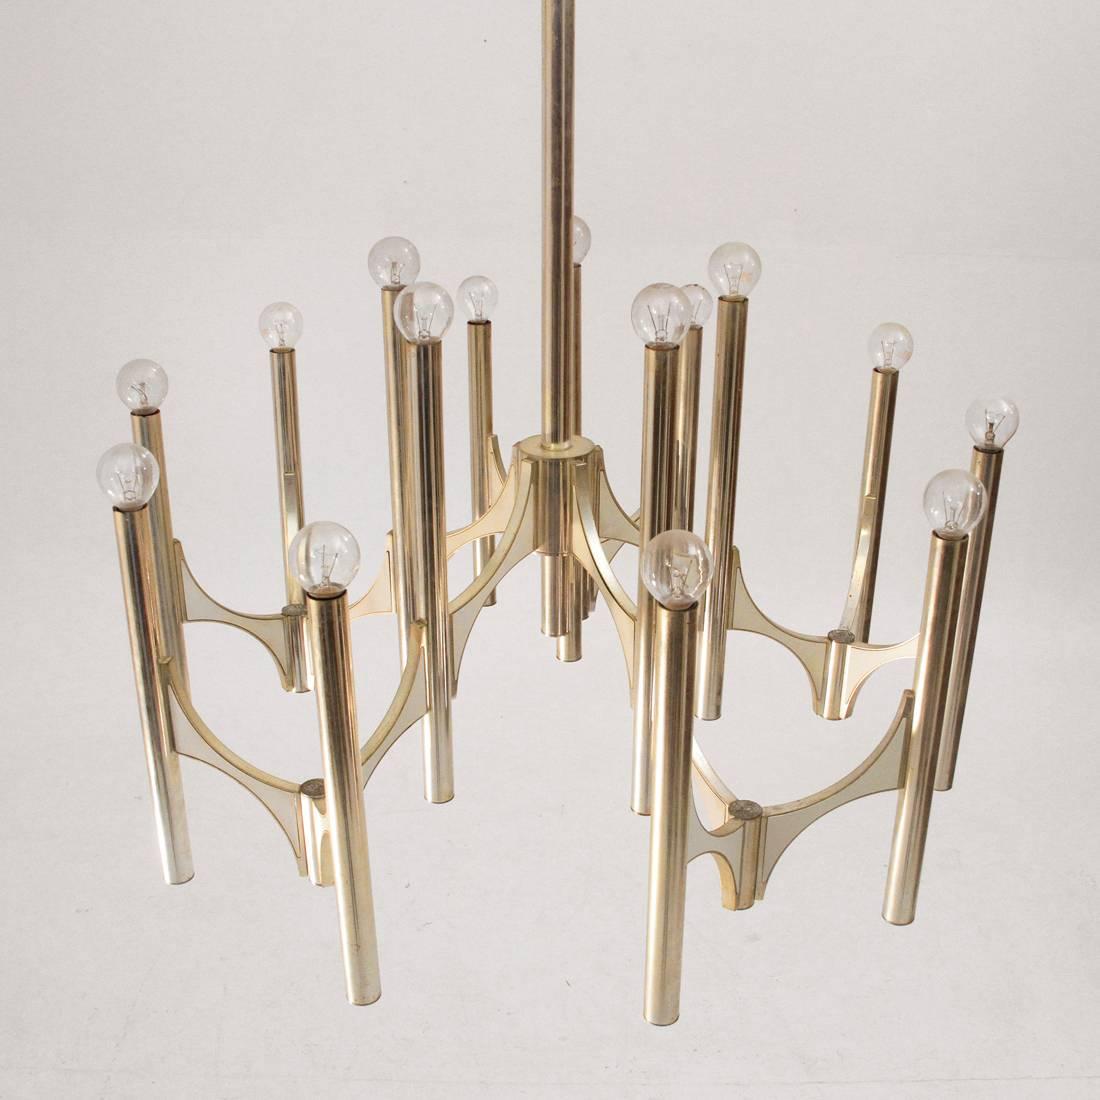 Magnificent chandelier produced by Sciolari in the 1970s.
Nickel-plated brass structure with white painted metal inserts.
Five arms that mount 15 lights.
Good general conditions, structure to be polished.
Dimensions: Diameter 80 cm, height 120